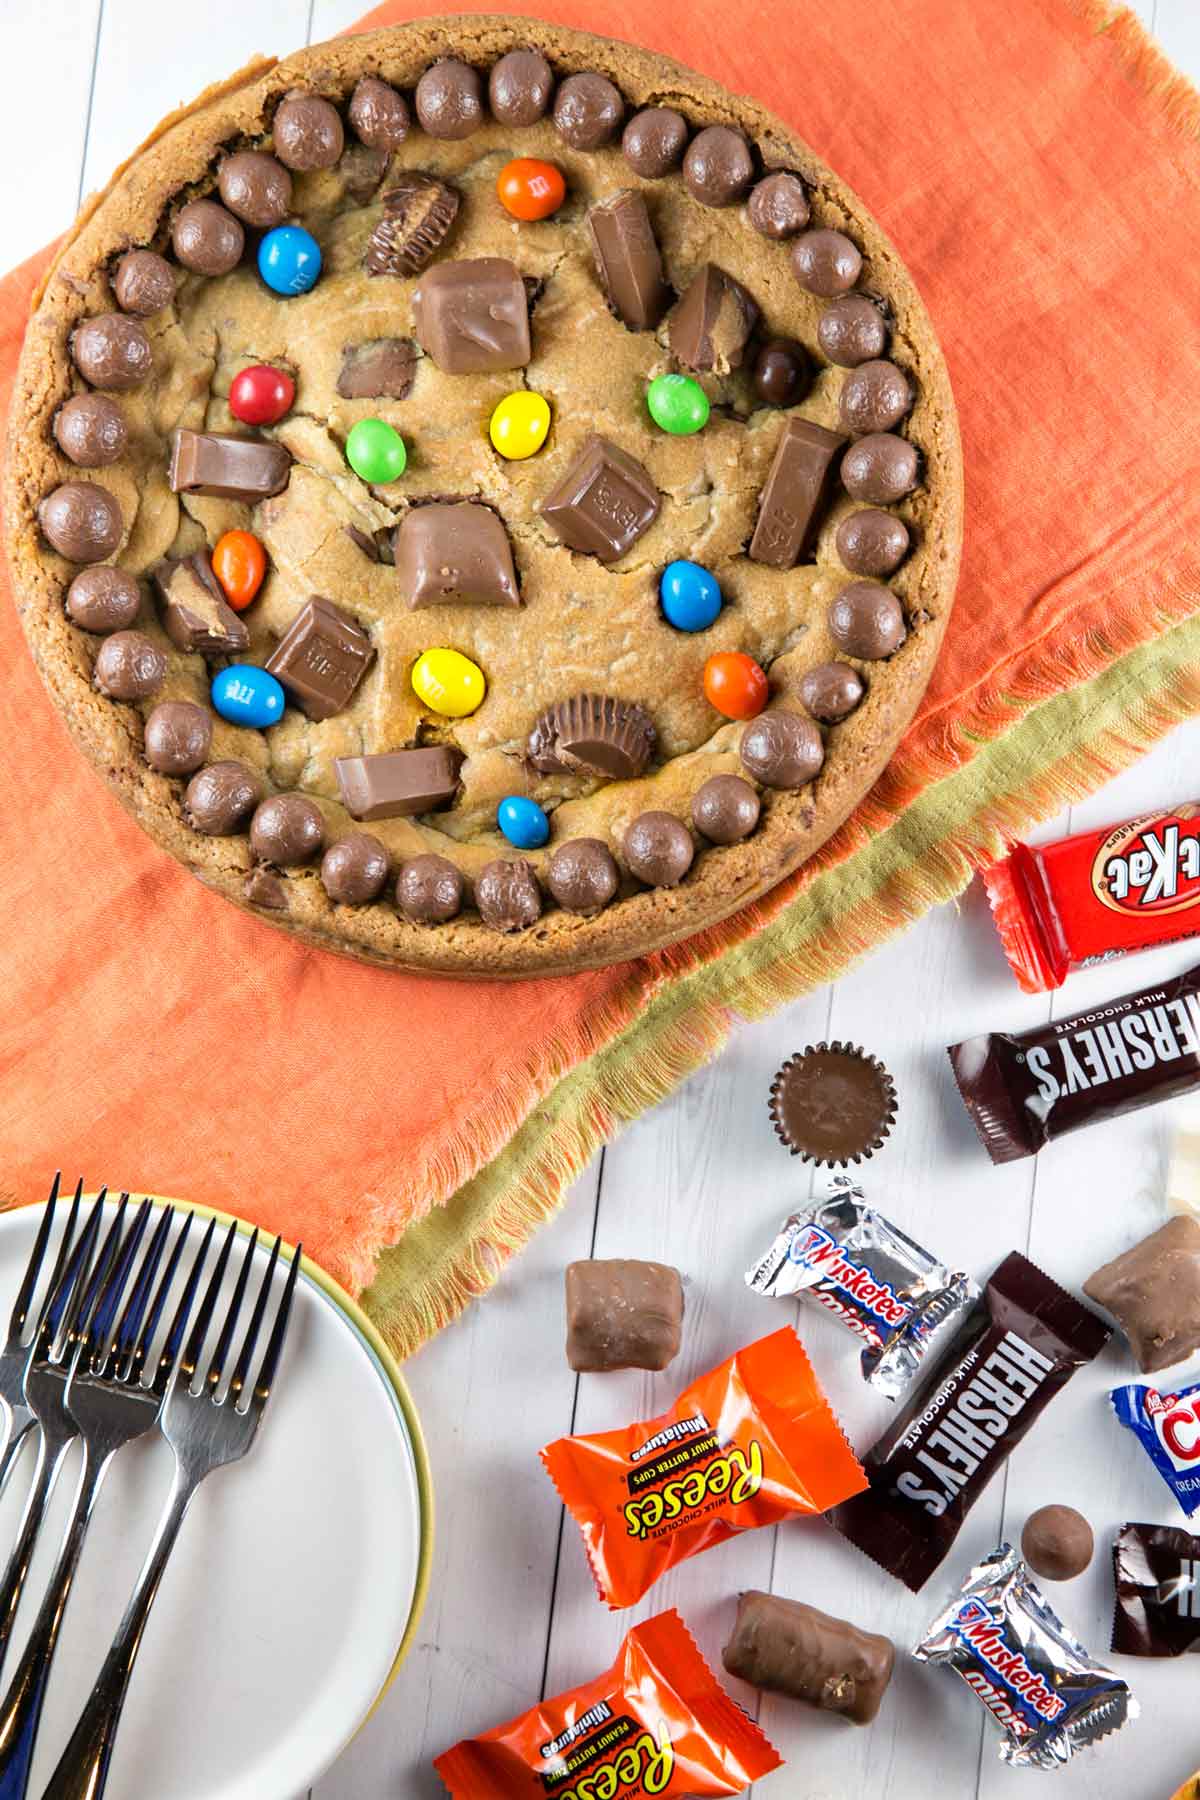 How To Store A Cookie Cake Overnight